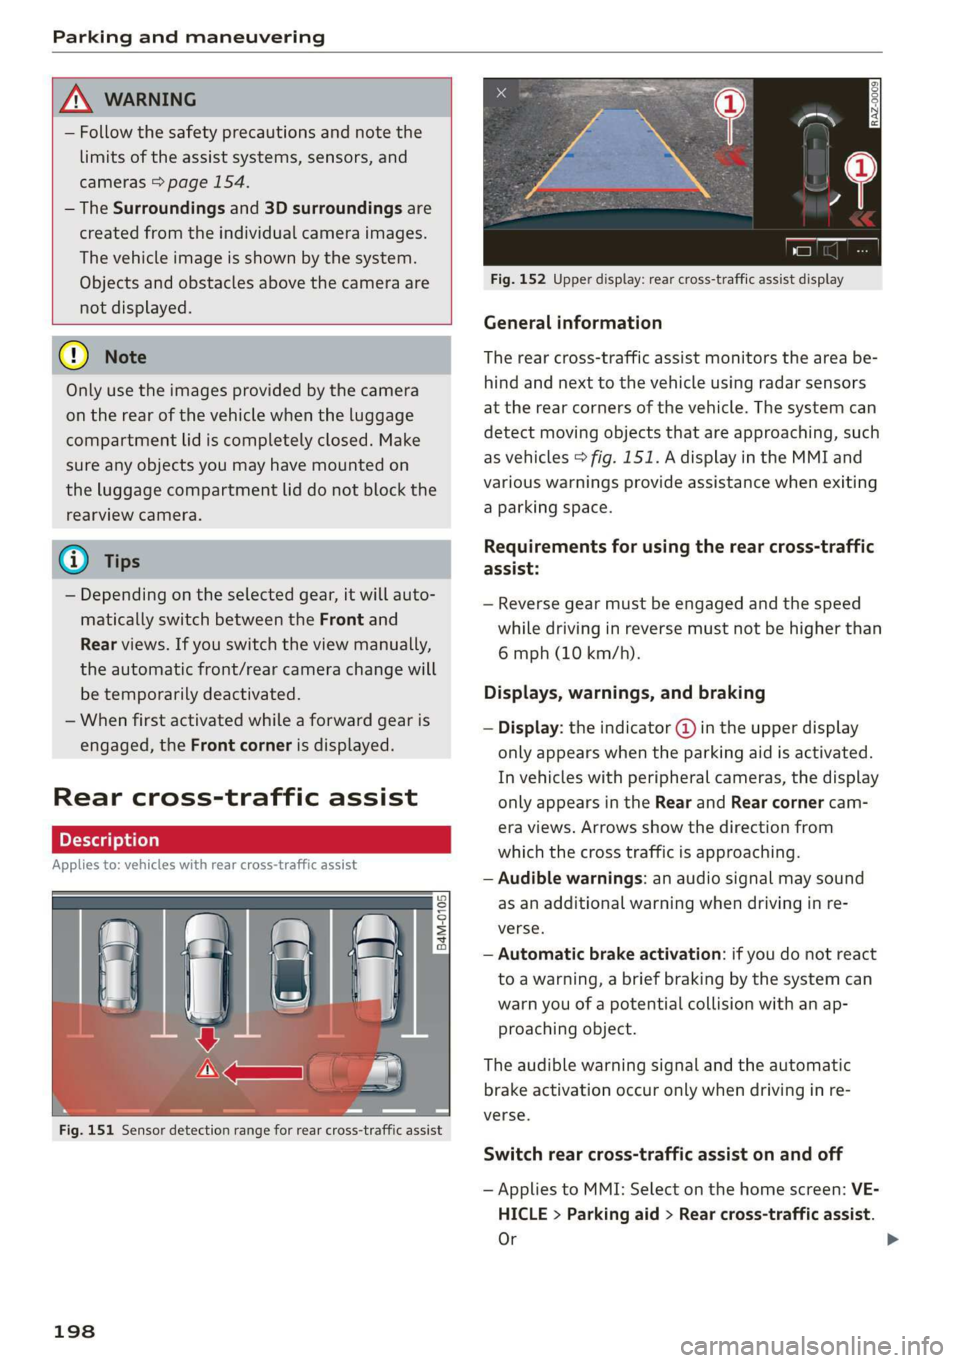 AUDI A8 2020 User Guide Parking and maneuvering 
  
  
A WARNING 
— Follow the safety precautions and note the 
limits of the assist systems, sensors, and 
cameras > page 154. 
— The Surroundings and 3D surroundings are 